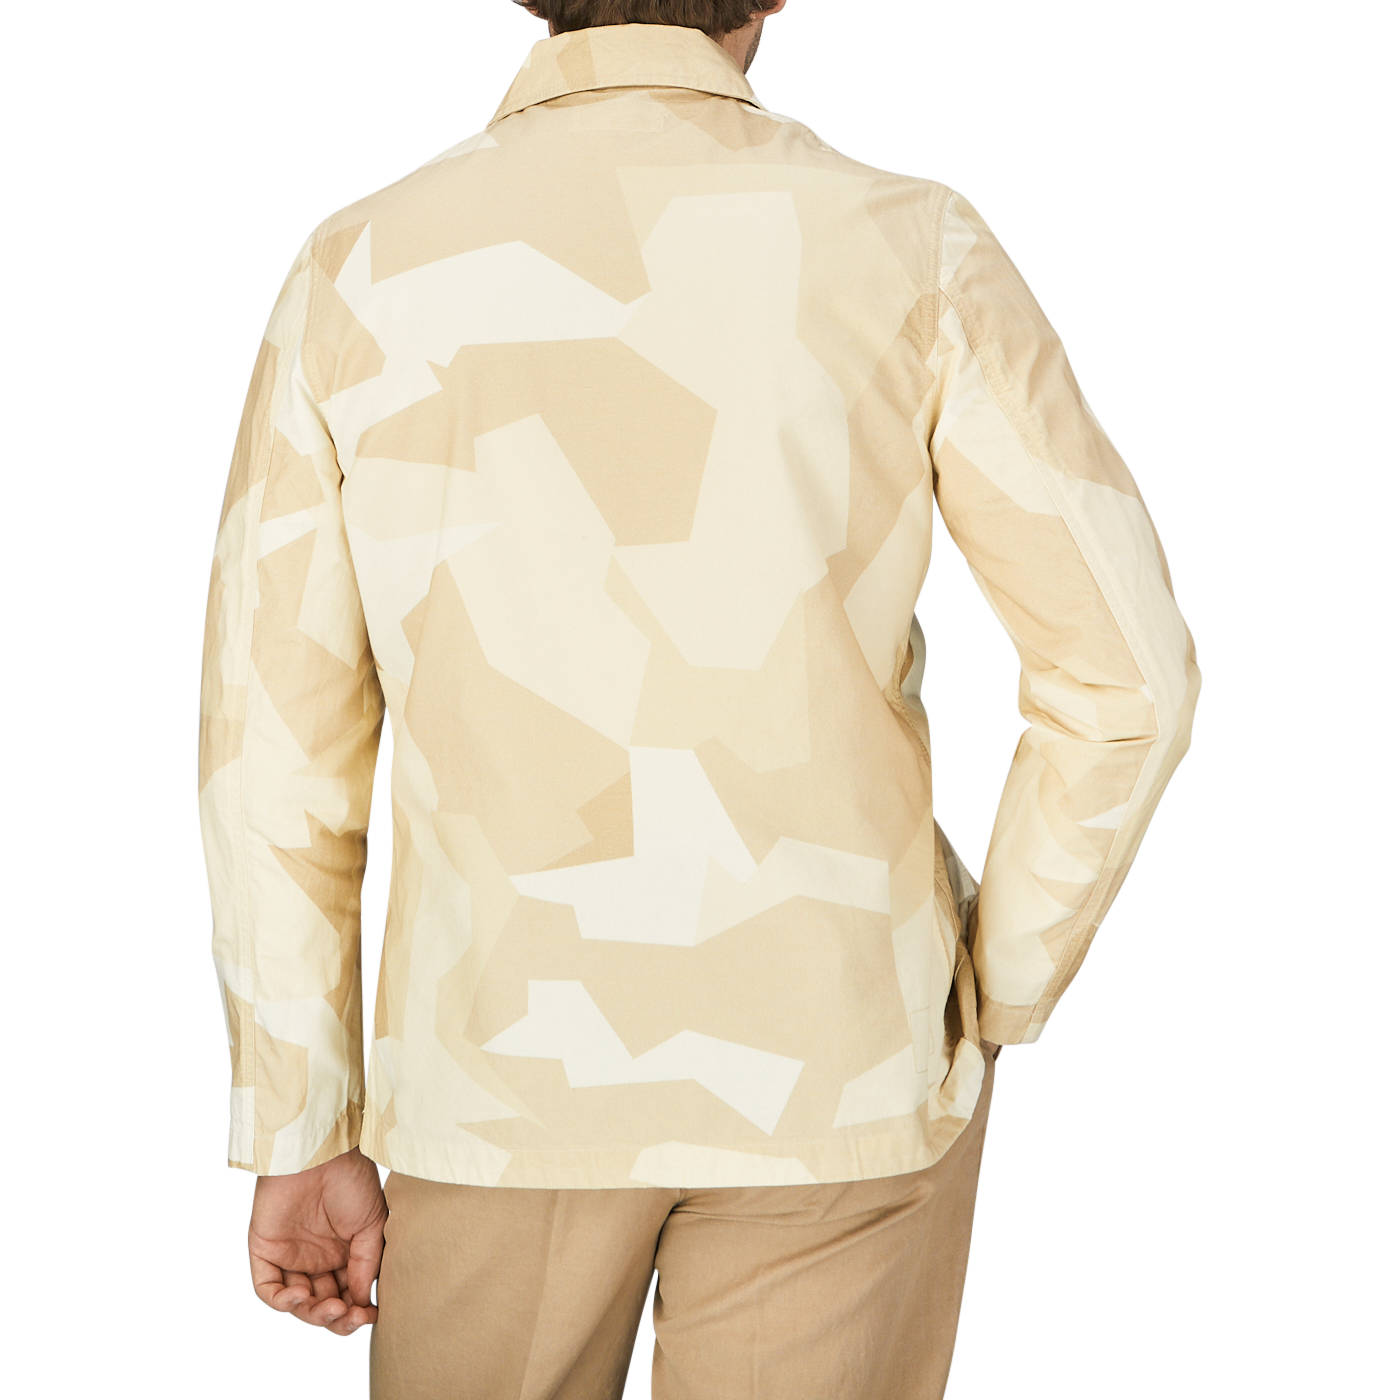 The back view of a man wearing a Universal Works Sand Beige Camo Cotton Bakers C jacket.